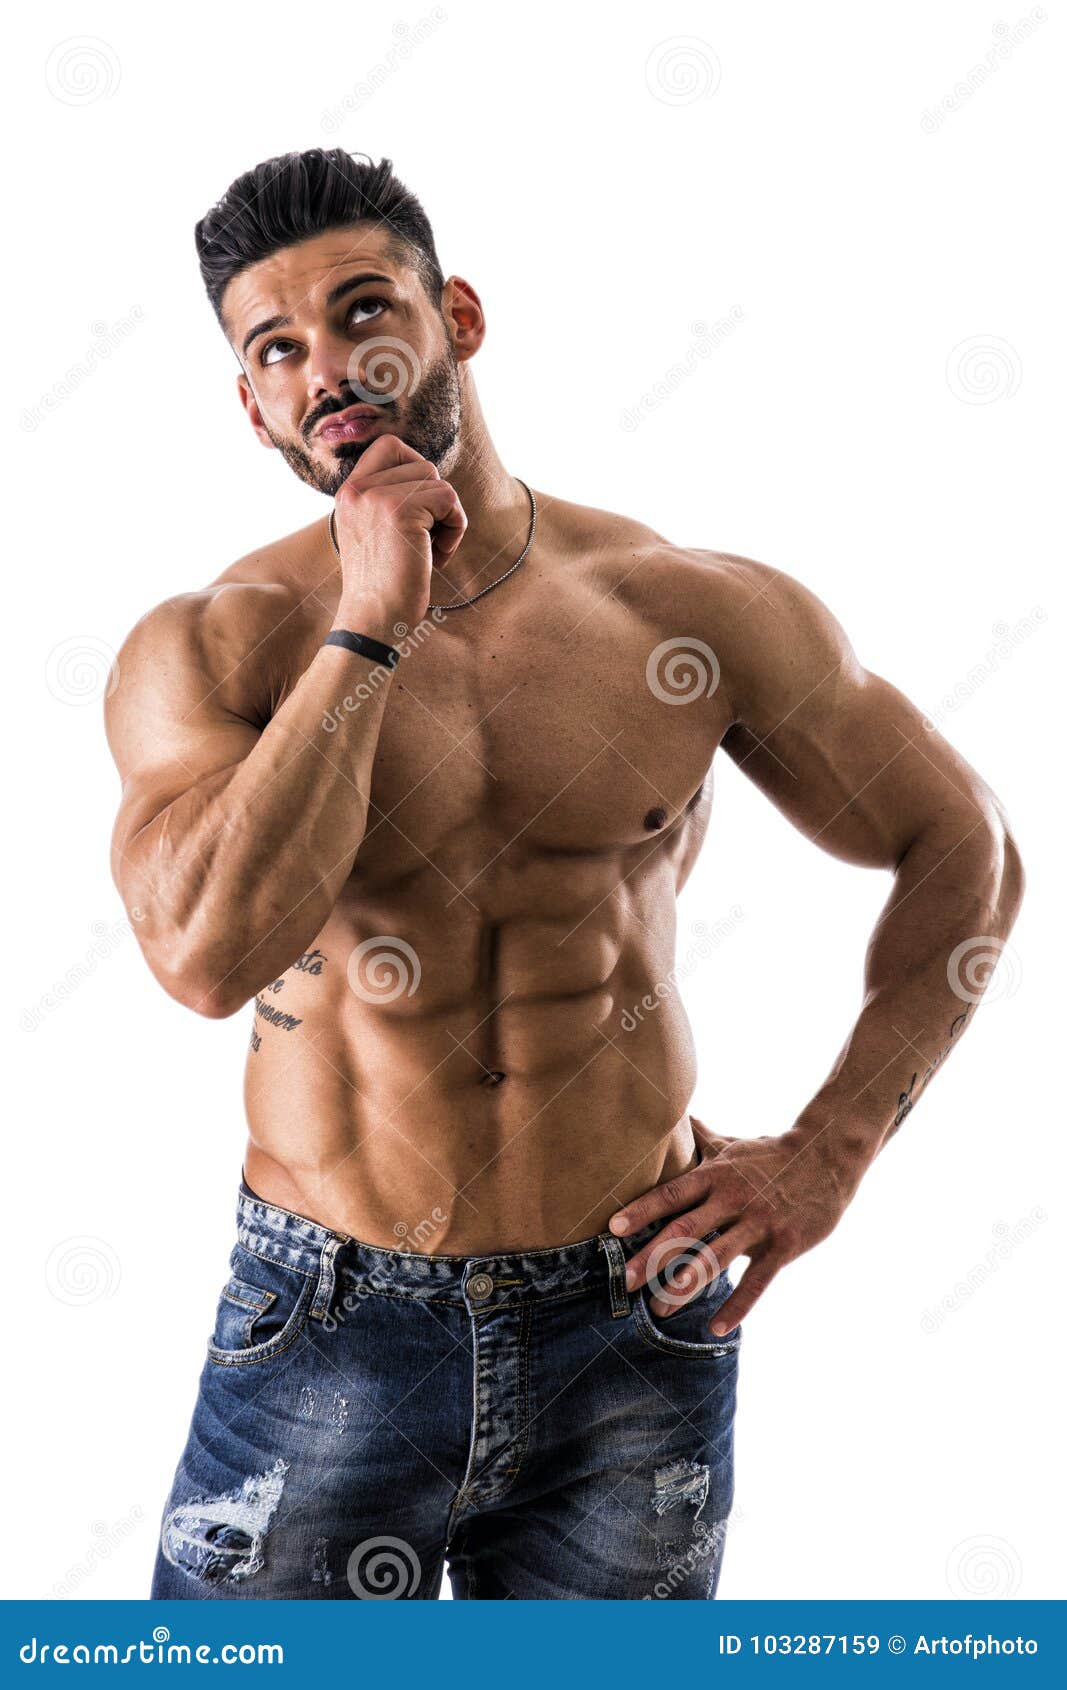 Muscular Shirtless Man Unsure or Confused Stock Image - Image of people ...